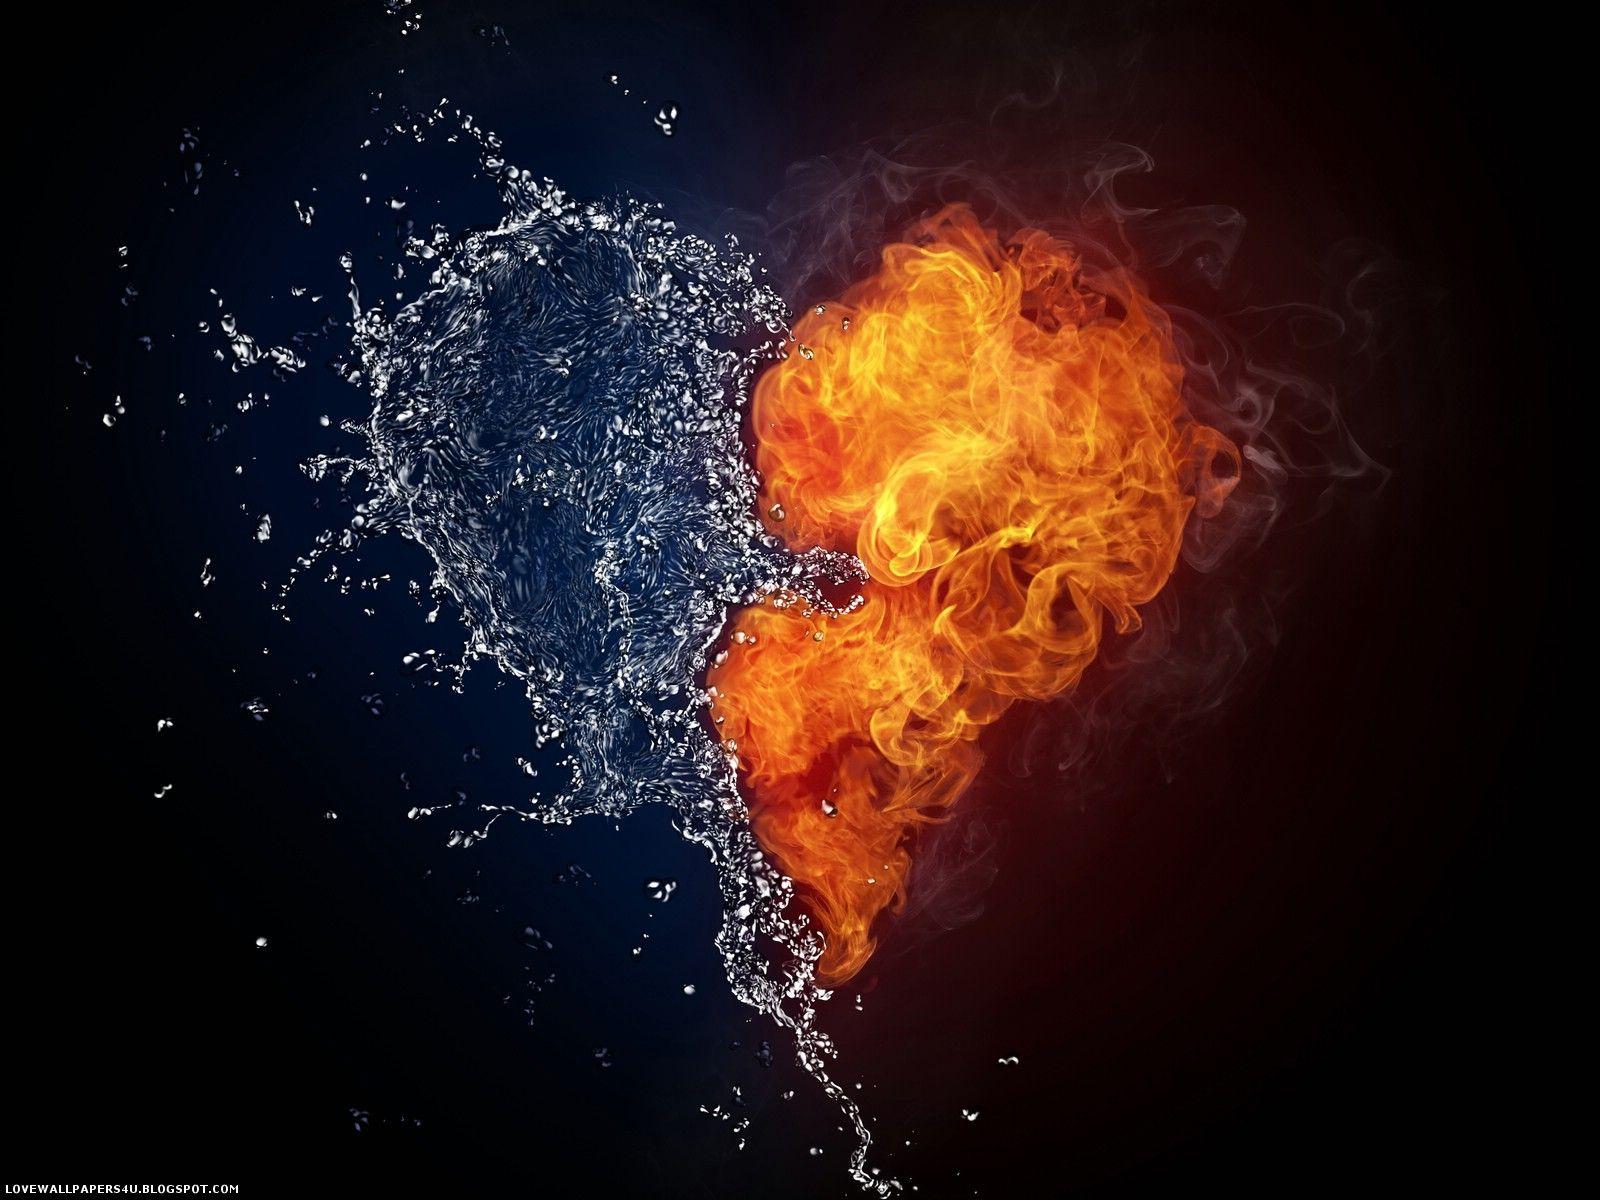 image of water and fire love wallpaper romantic stock wallpaper